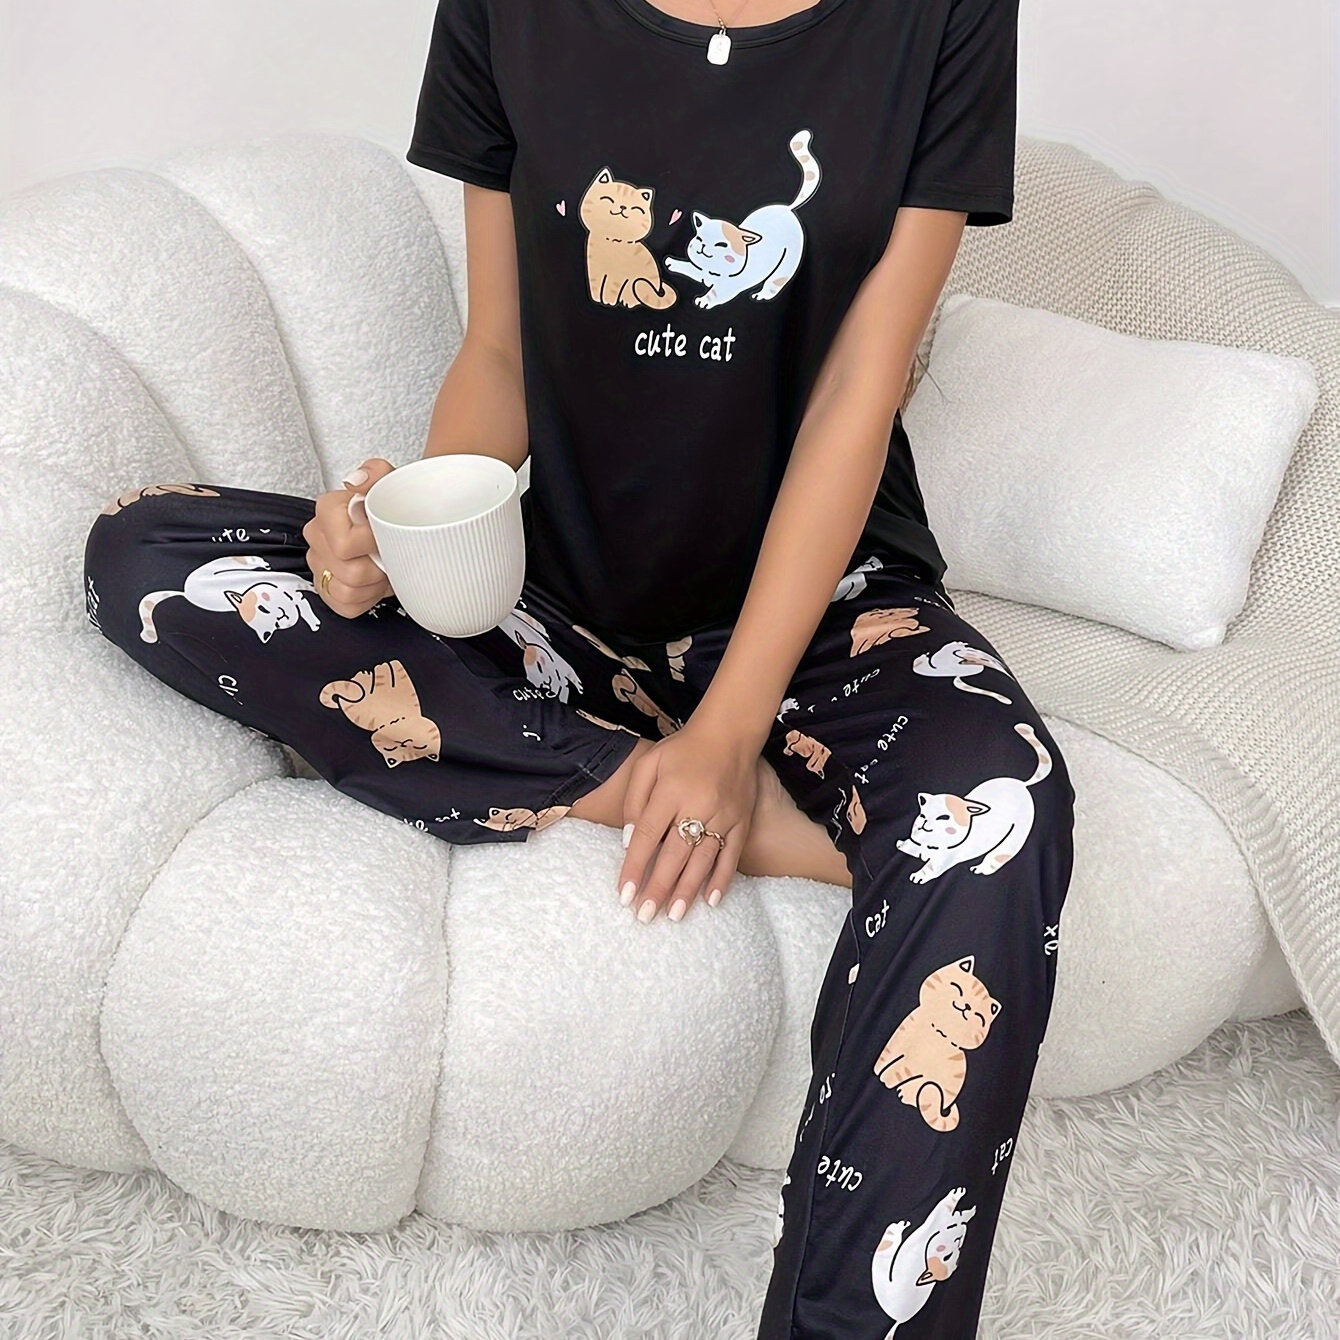 

Women's Cute Cat & Letter Print Pajama Set, Short Sleeve Round Neck Top & Pants, Comfortable Relaxed Fit